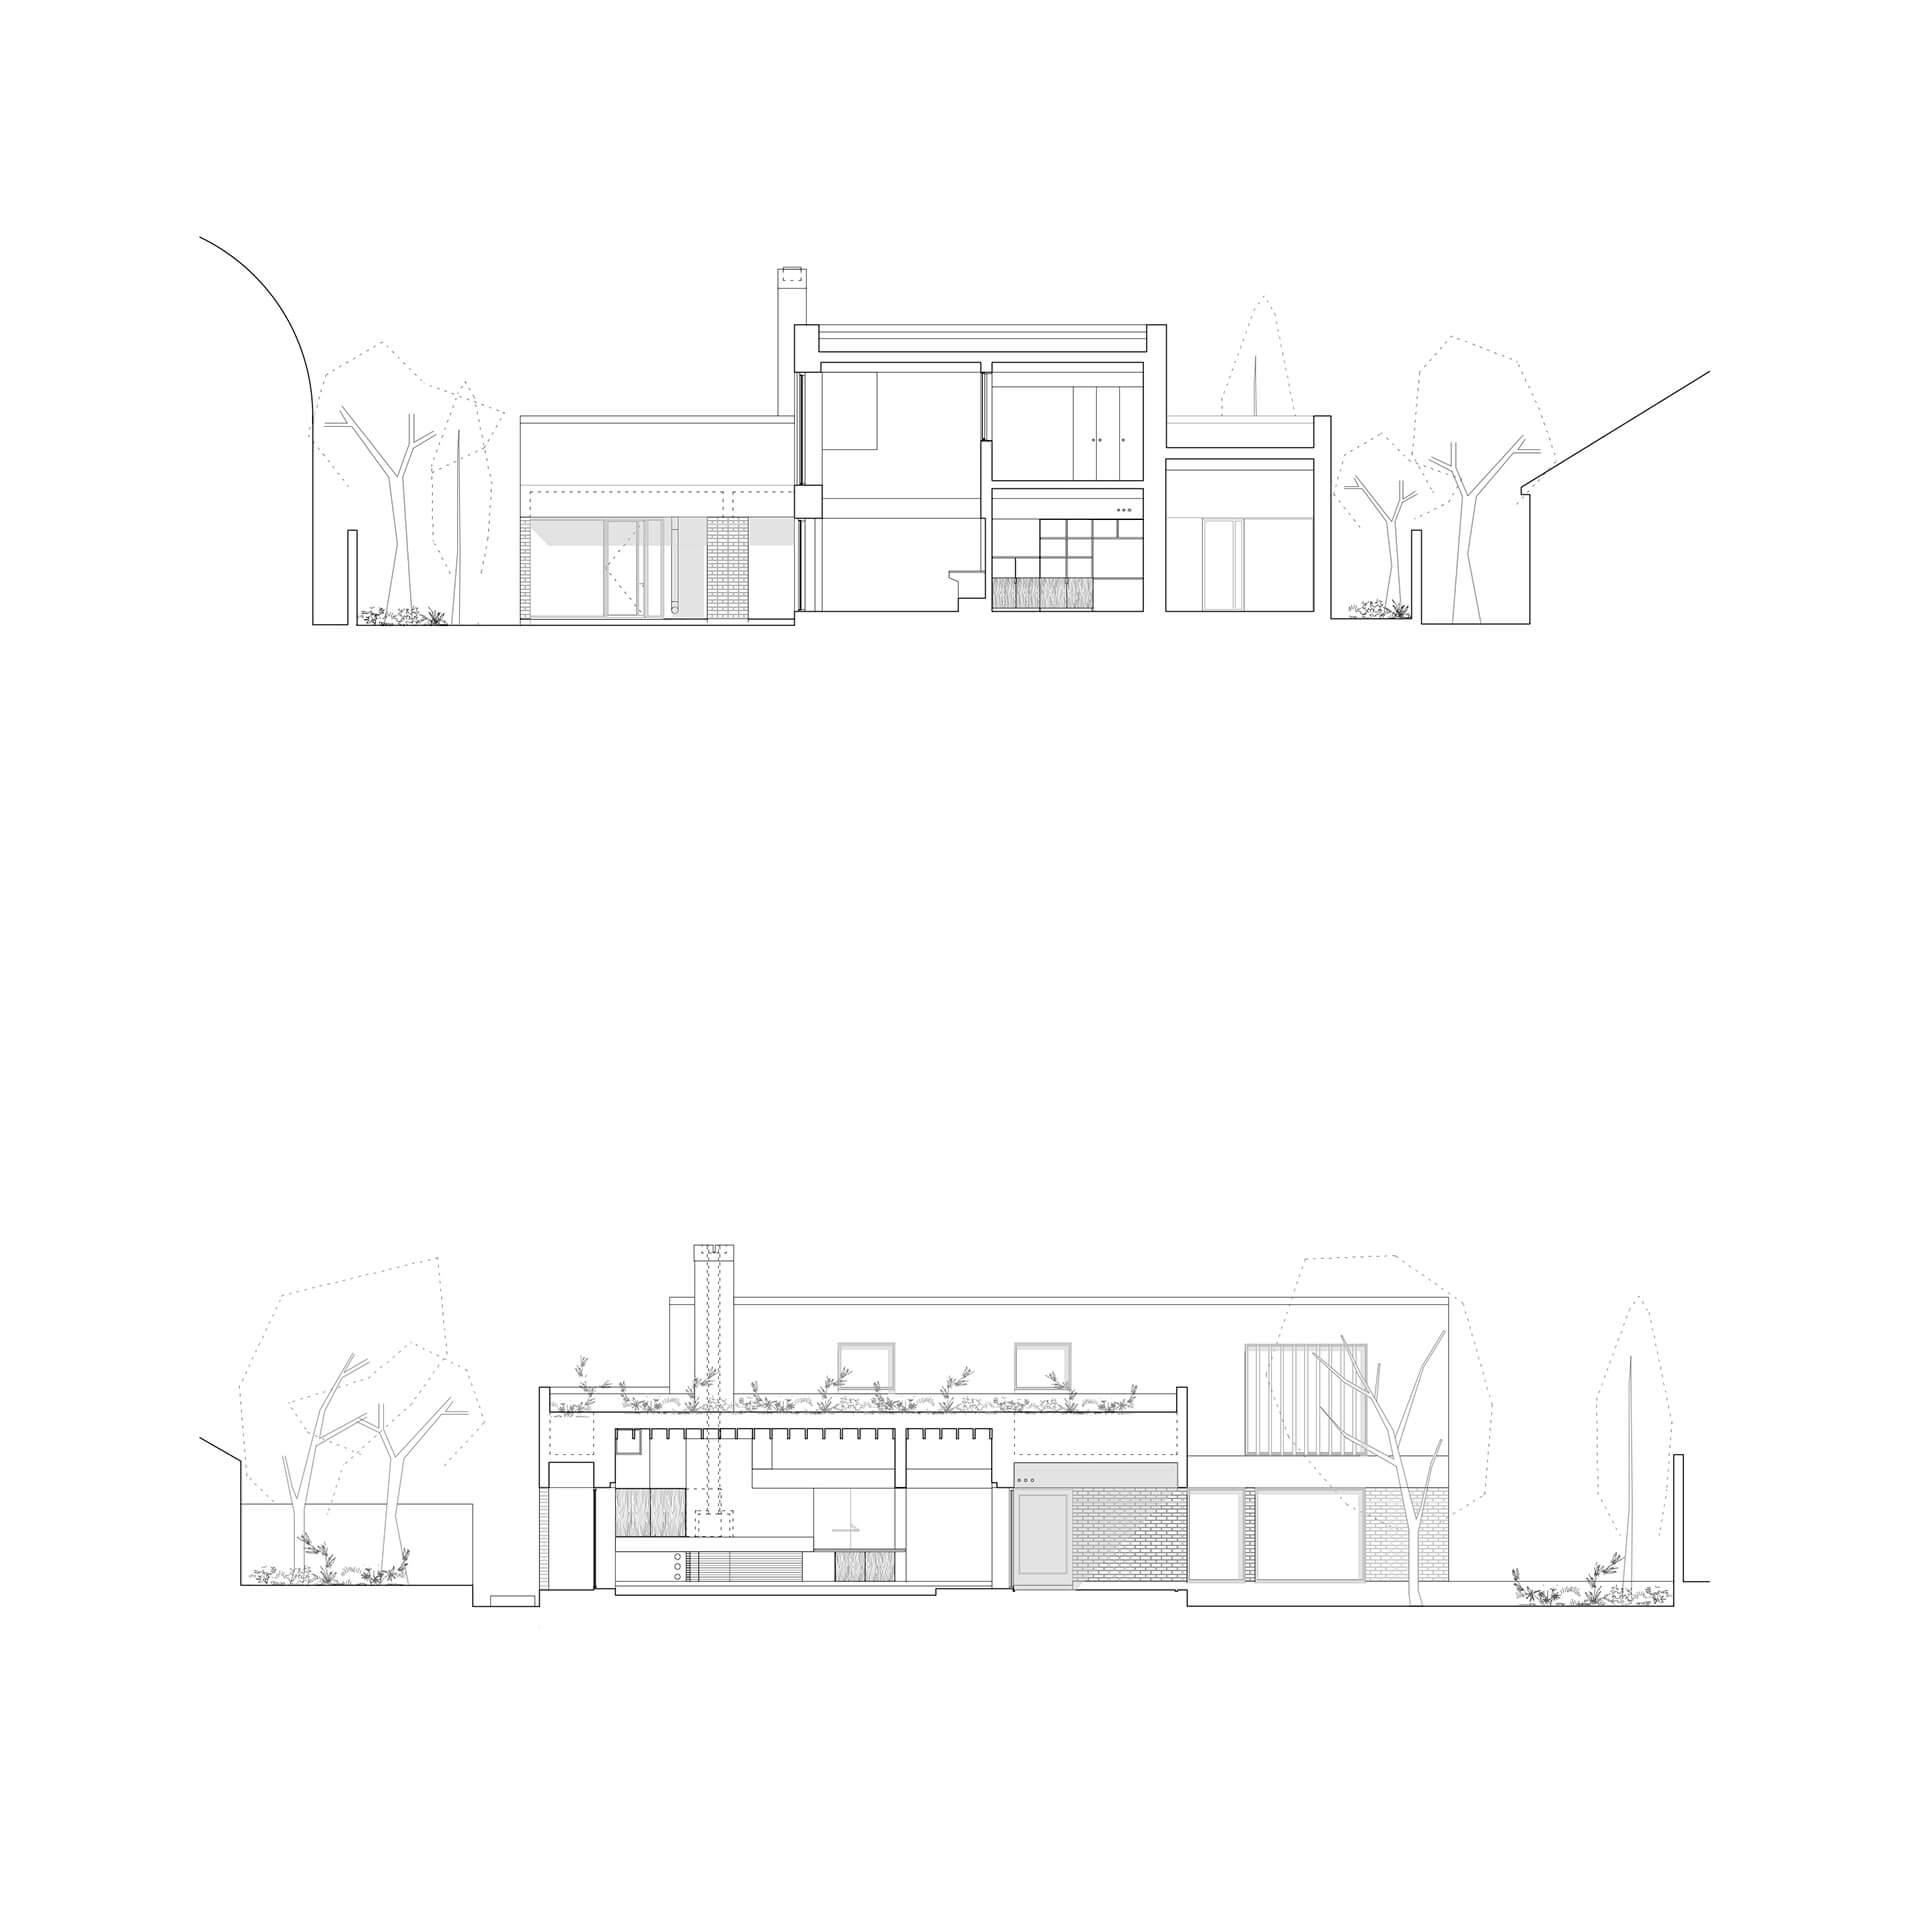 Steve Larkin Architects - Kimmage 4. Sections Combined